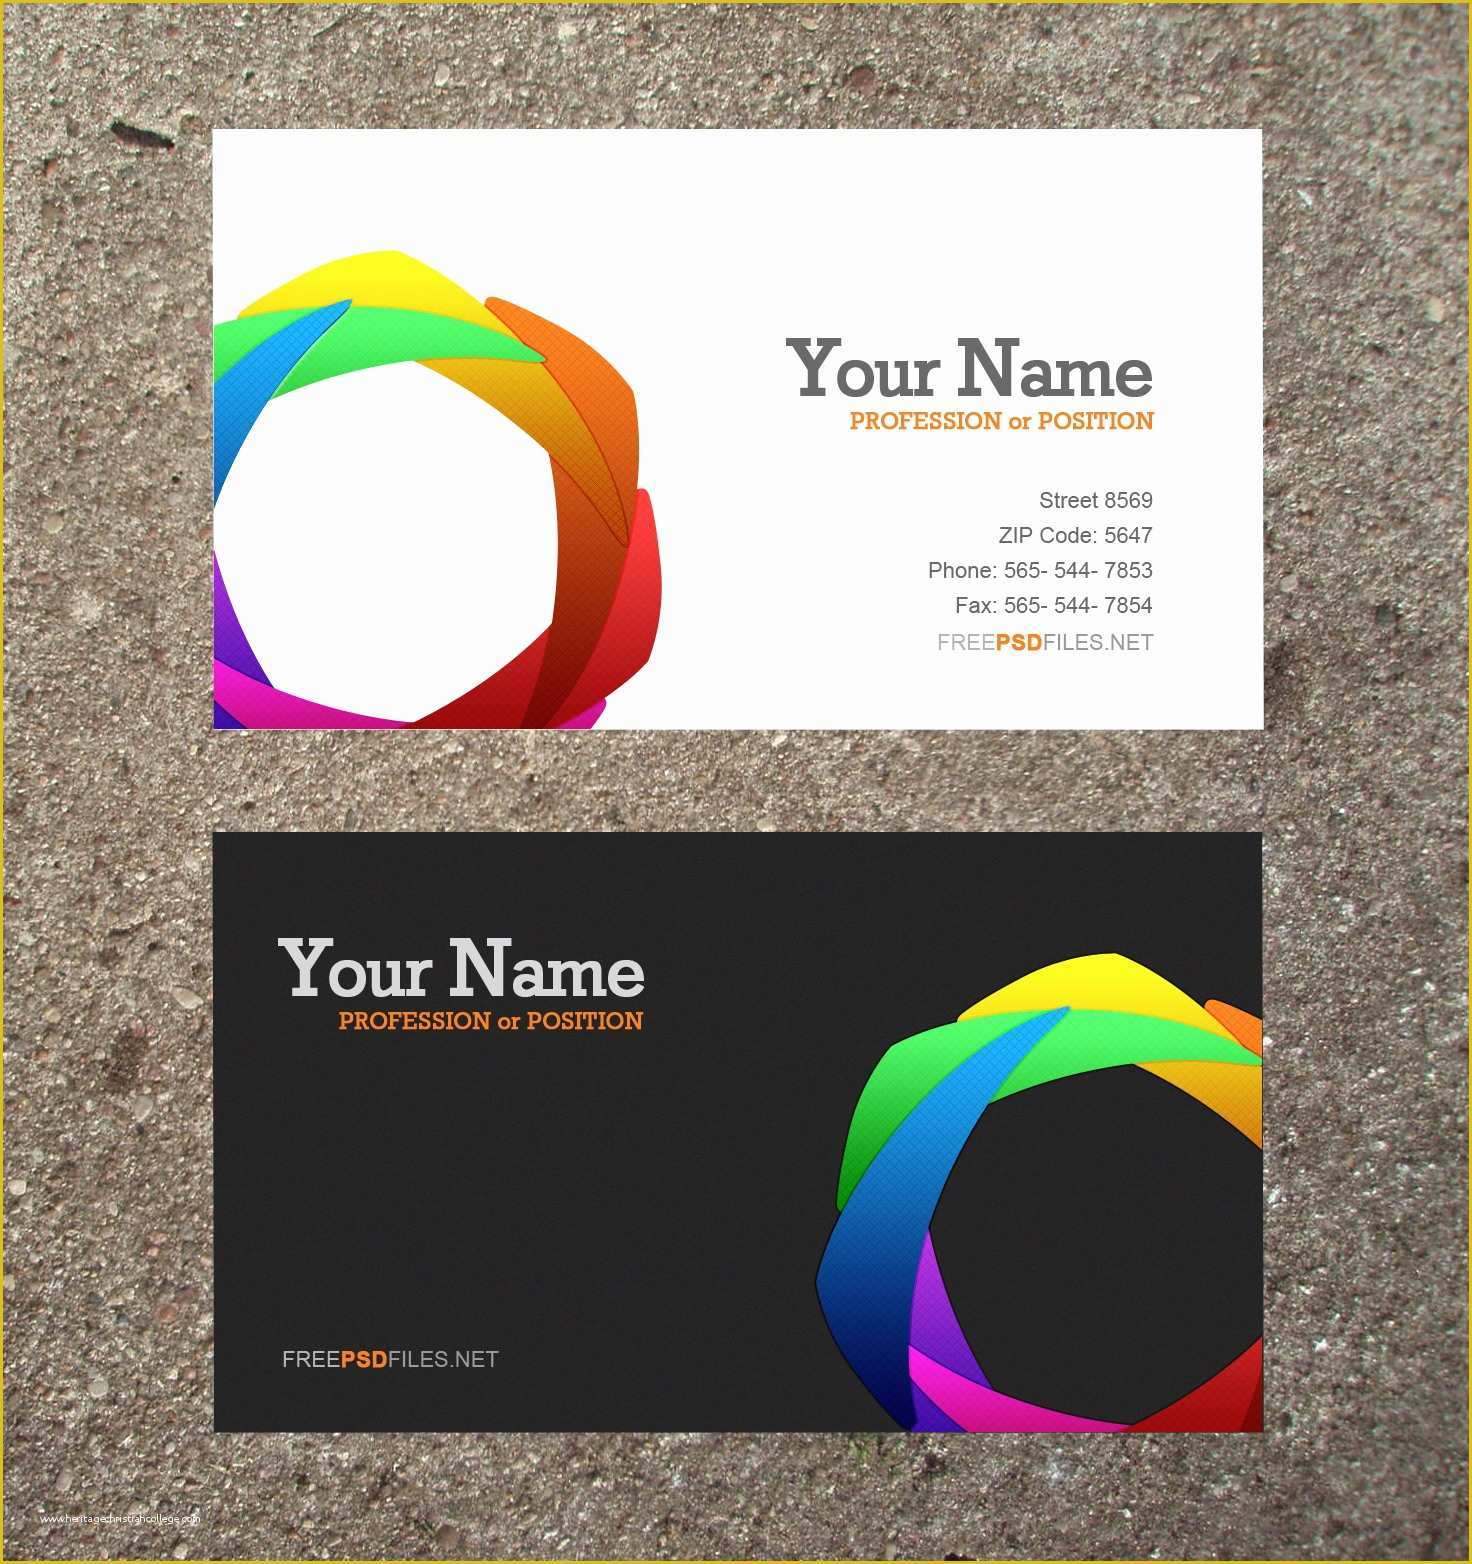 Www Free Business Card Templates Com Of 20 Free Psd Business Card Templates Free Business